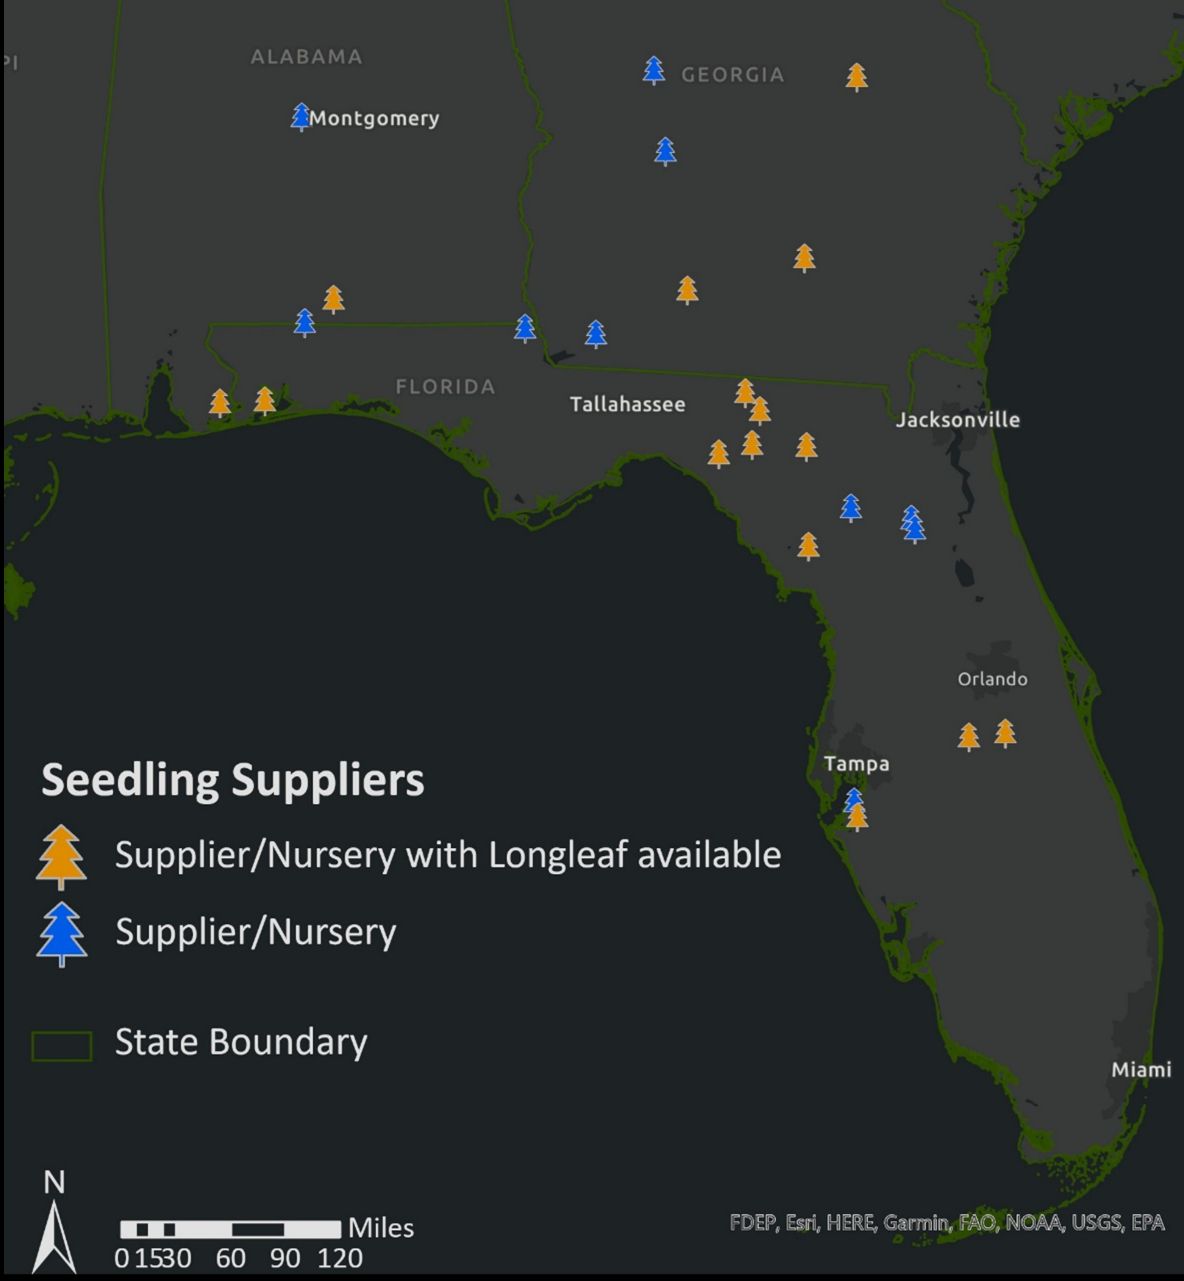 Map of seedling suppliers in Florida and within 100 miles of the state border. Orange points represent nurseries known to supply longleaf pine seedlings.